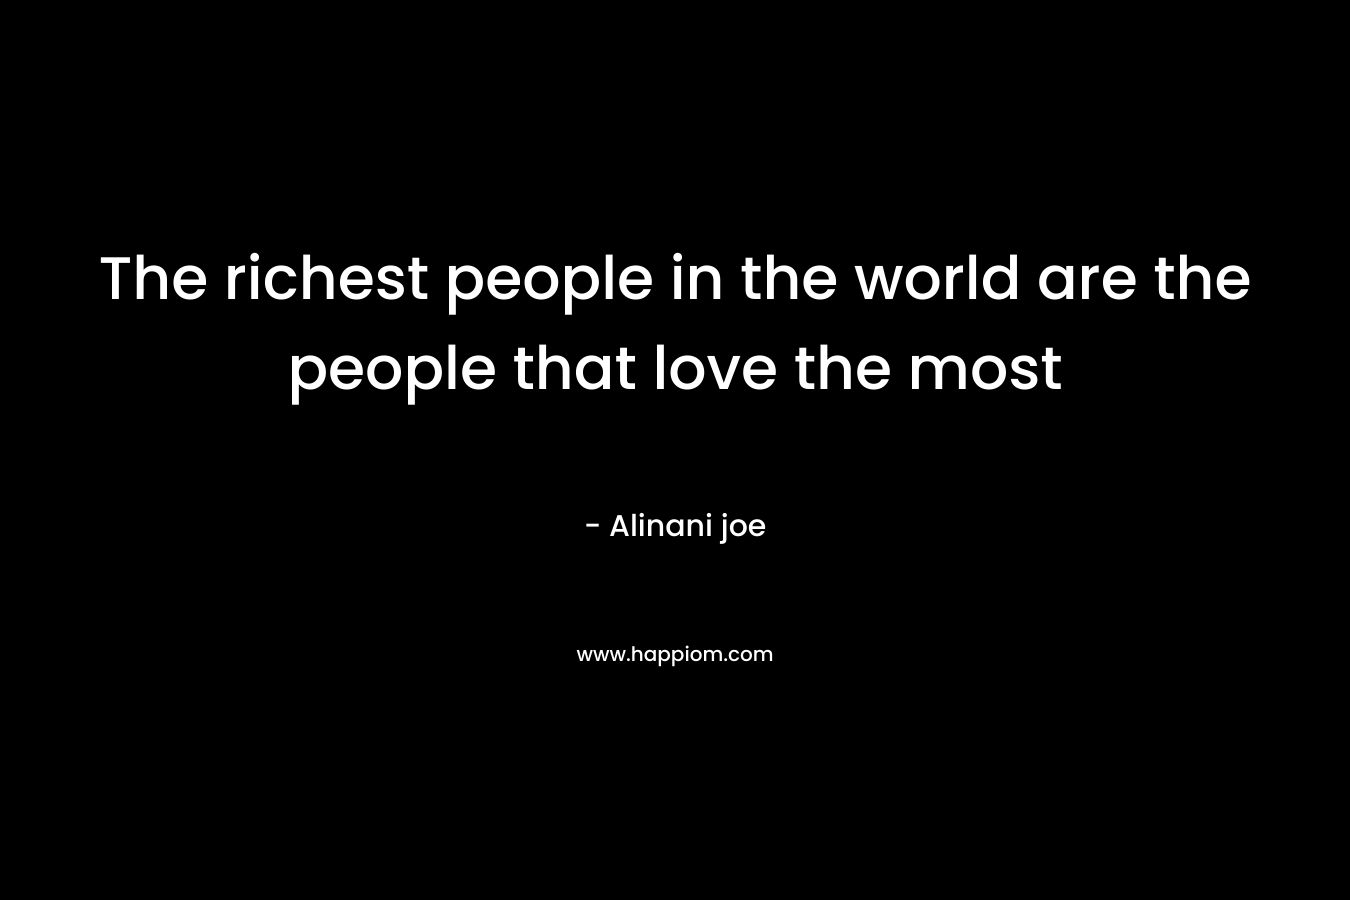 The richest people in the world are the people that love the most – Alinani joe